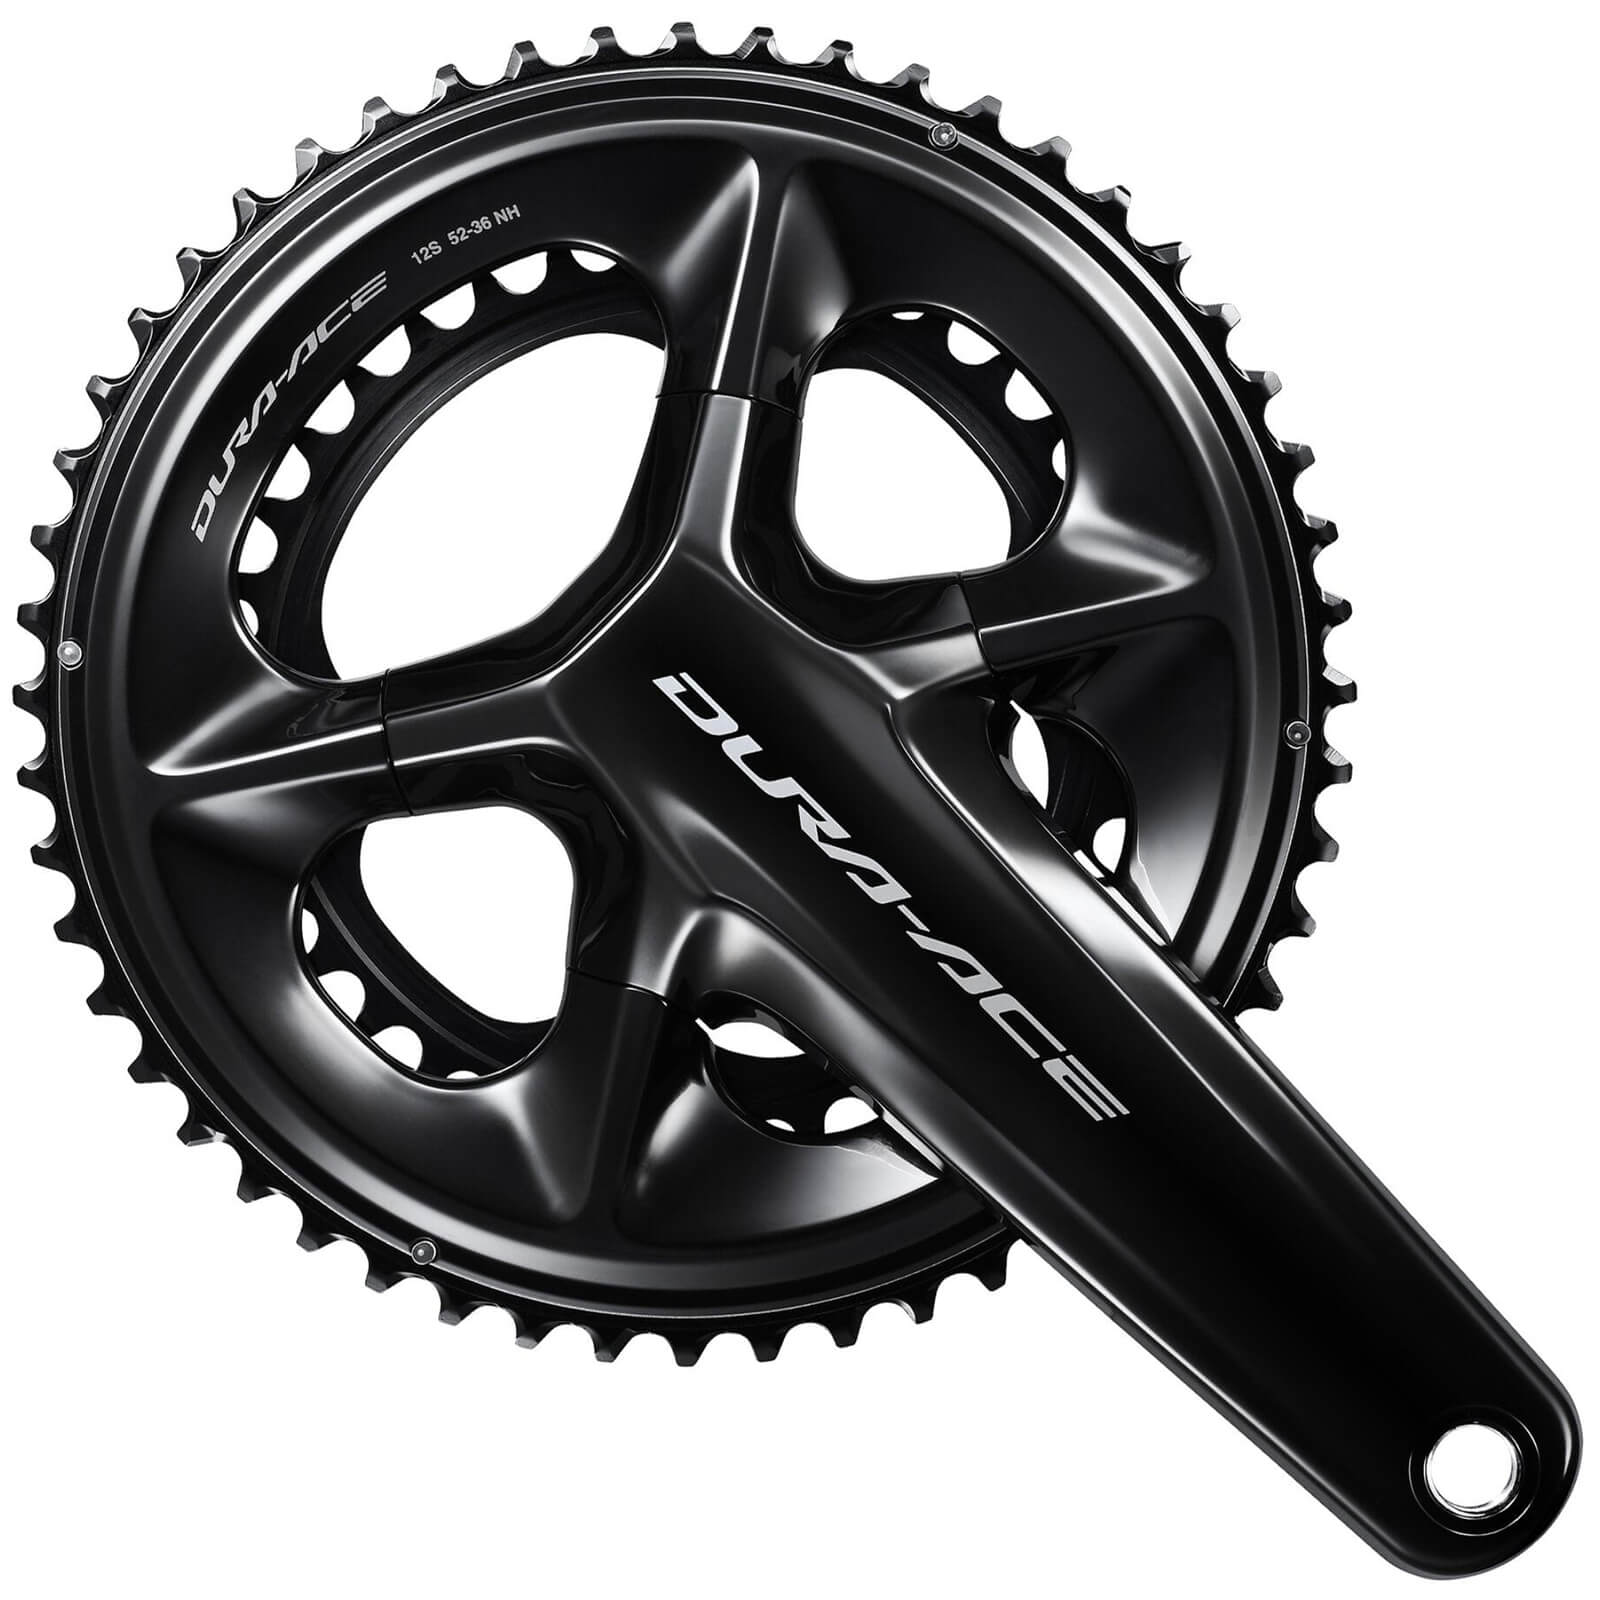 Shimano Dura-Ace R9200 Chainset - 172.5mm - 50/34